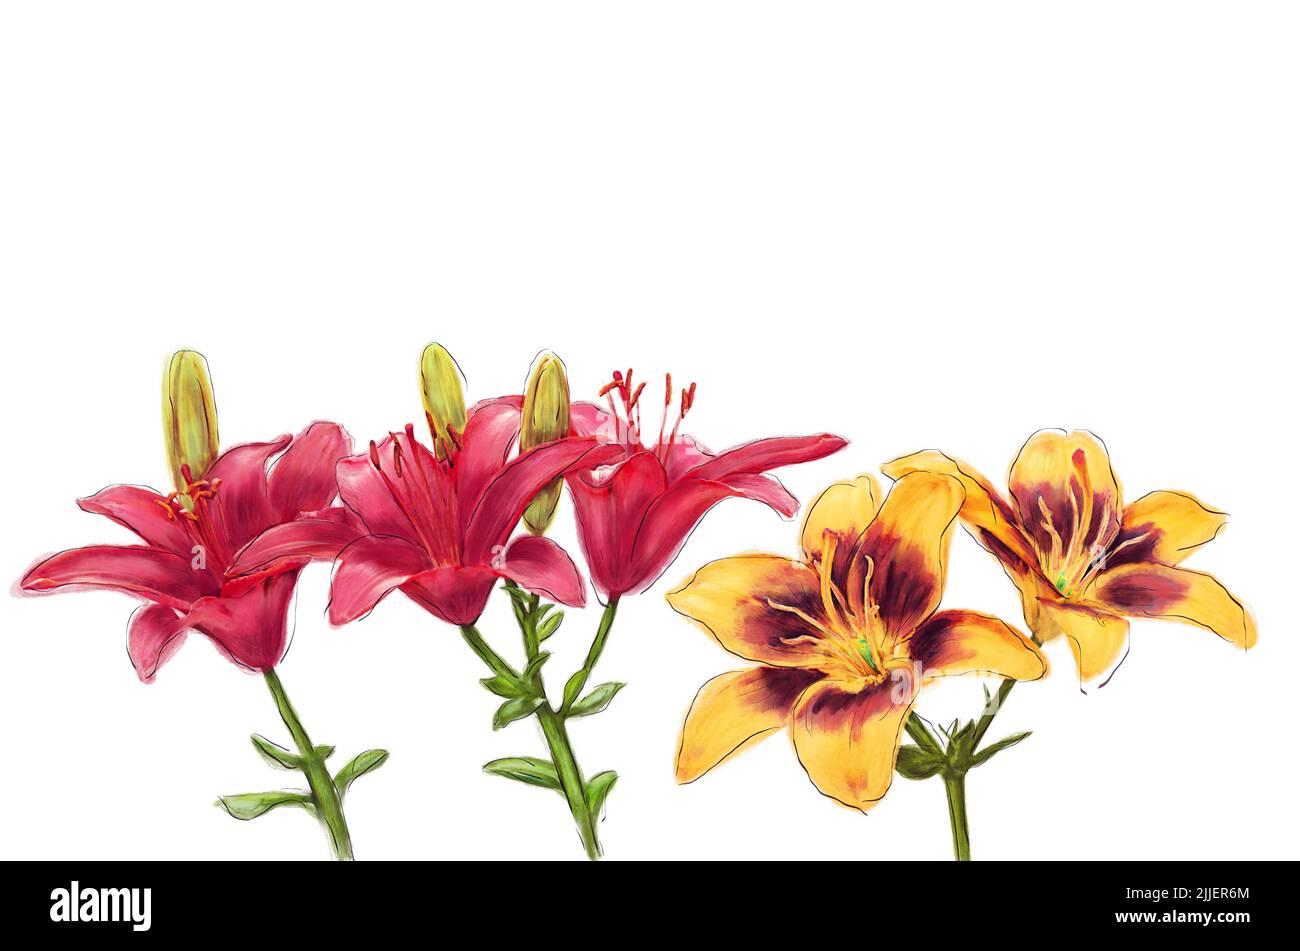 Lily Flowers watercolor illustration isolated on white background Stock Photo